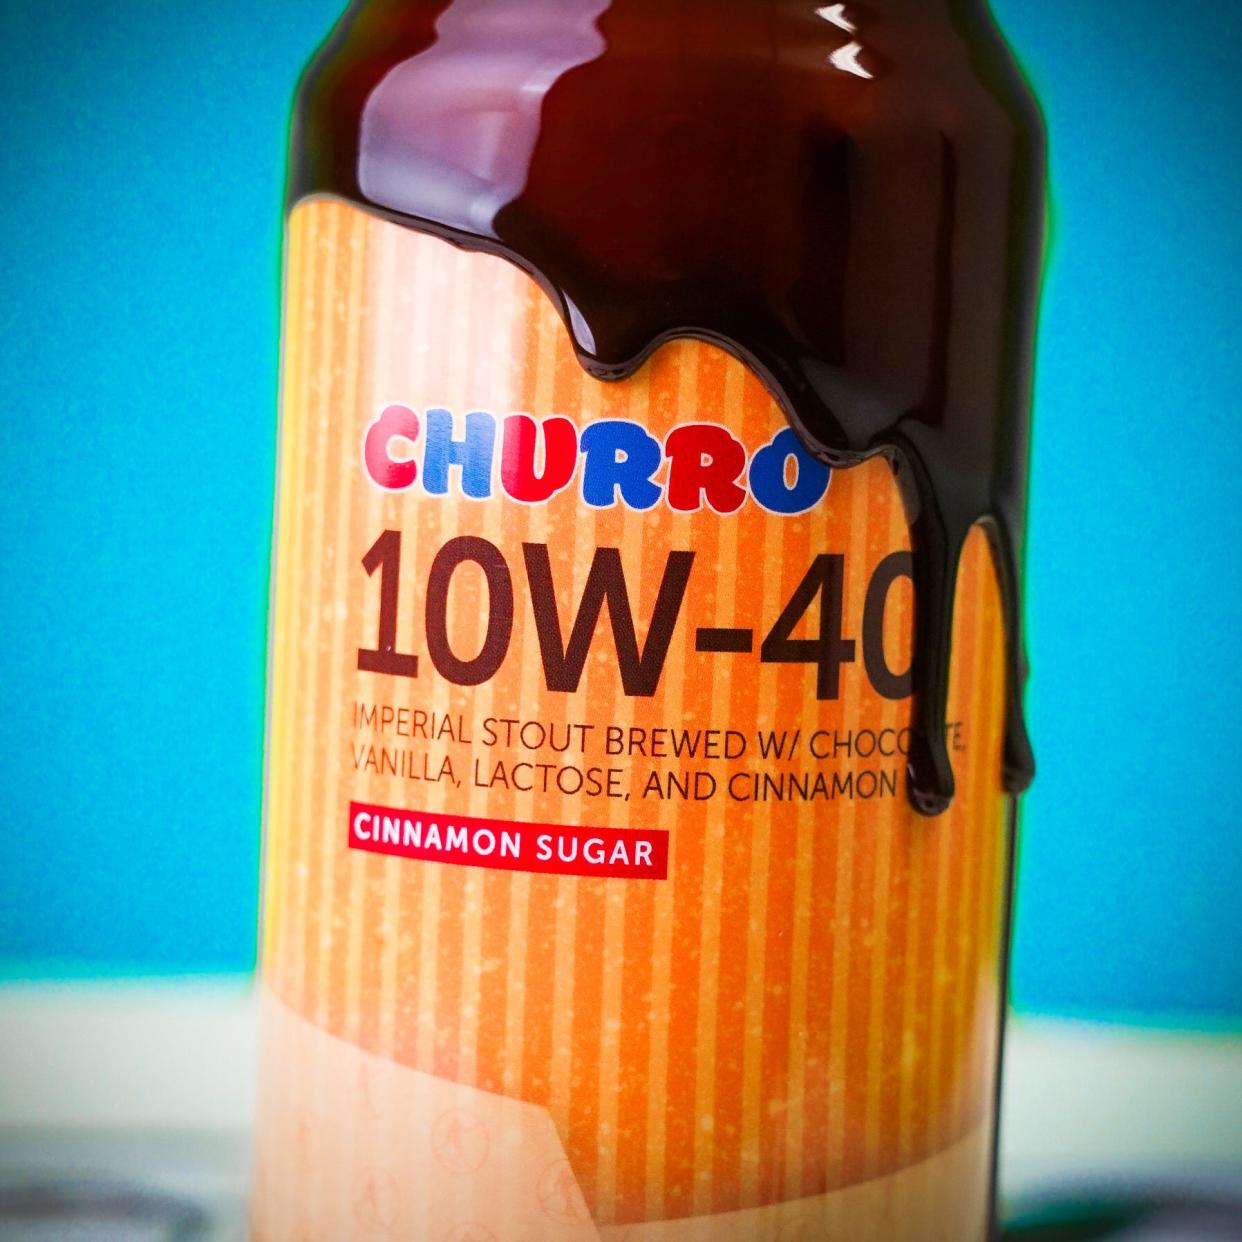 Hi-Wire Brewing Co.'s Churro 10W-40 Imperial Stout received the silver medal in the 2024 World Beer Cup in the category of Dessert Stout or Pastry Stout.